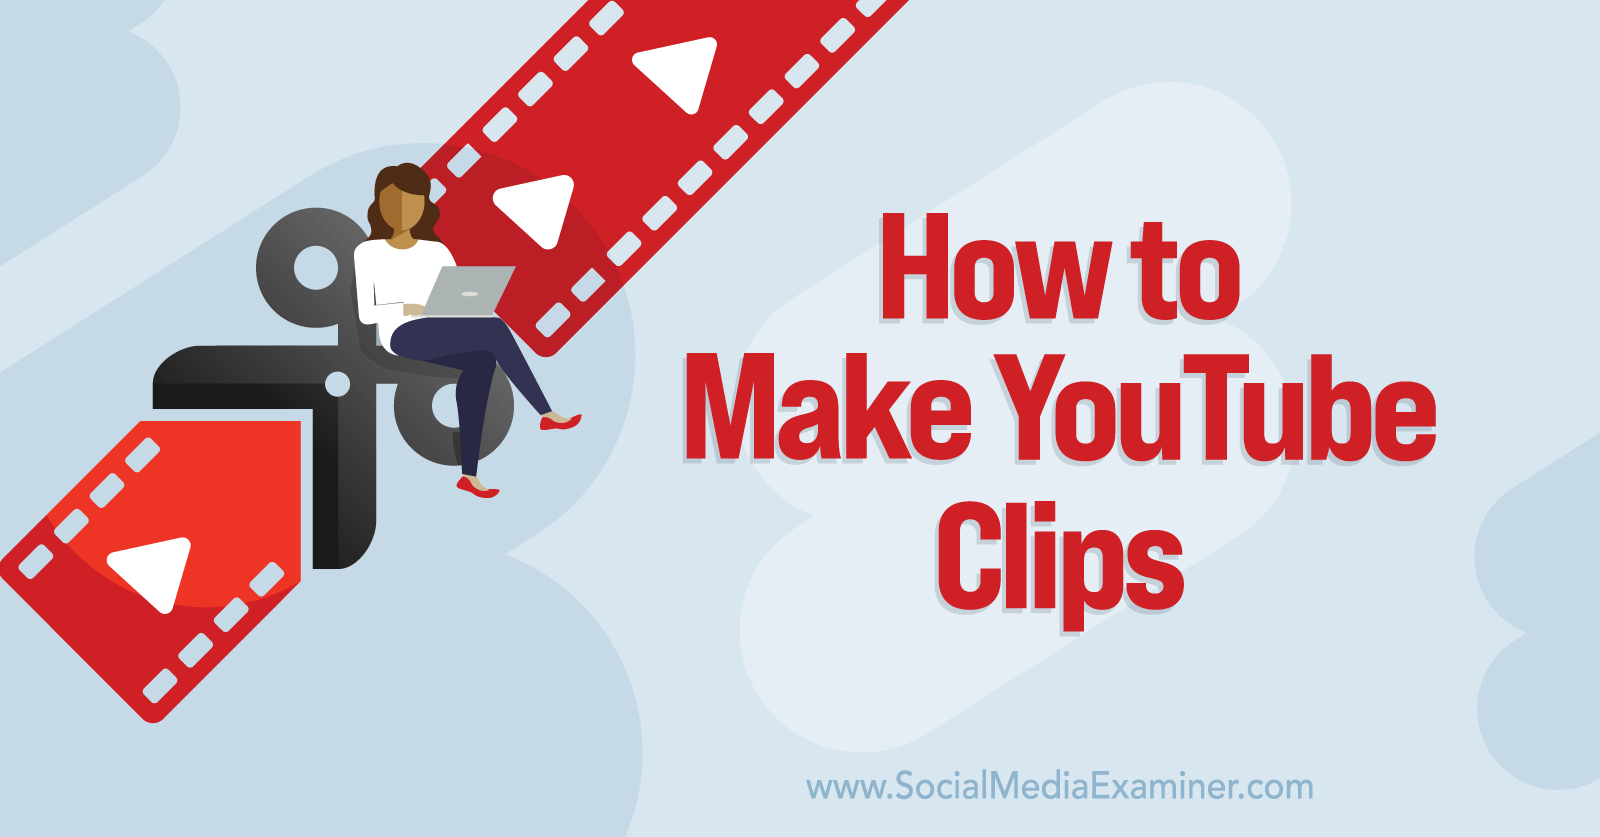 https://www.socialmediaexaminer.com/wp-content/uploads/2022/07/youtube-clips-how-to-create-1600.png